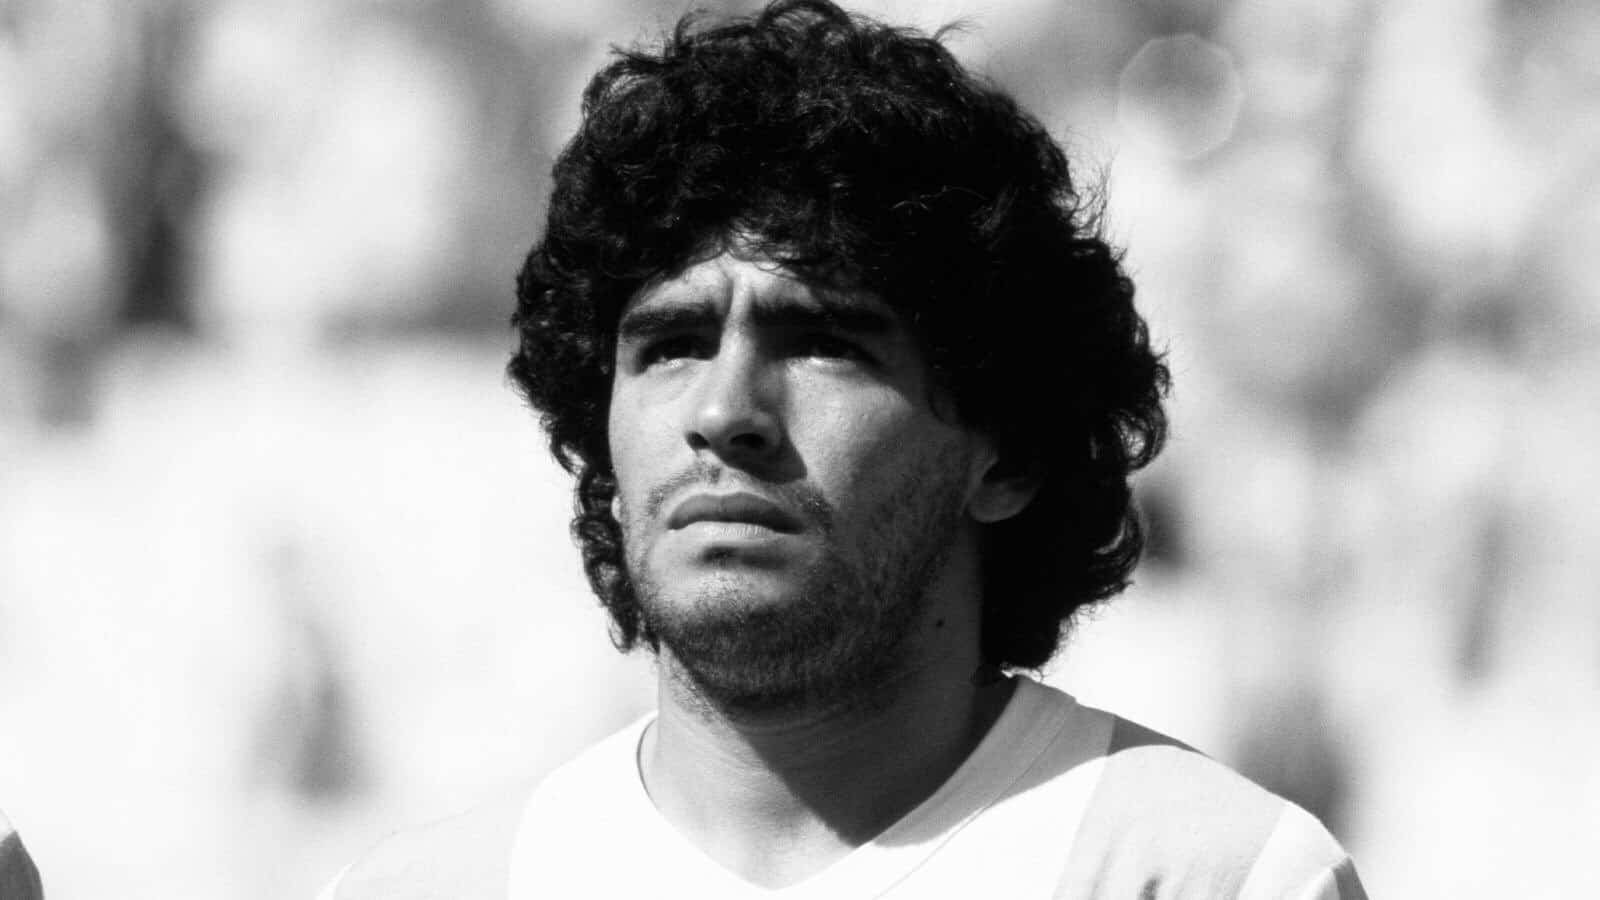 RIP Diego Maradona. A divine talent with more than a touch of the devil